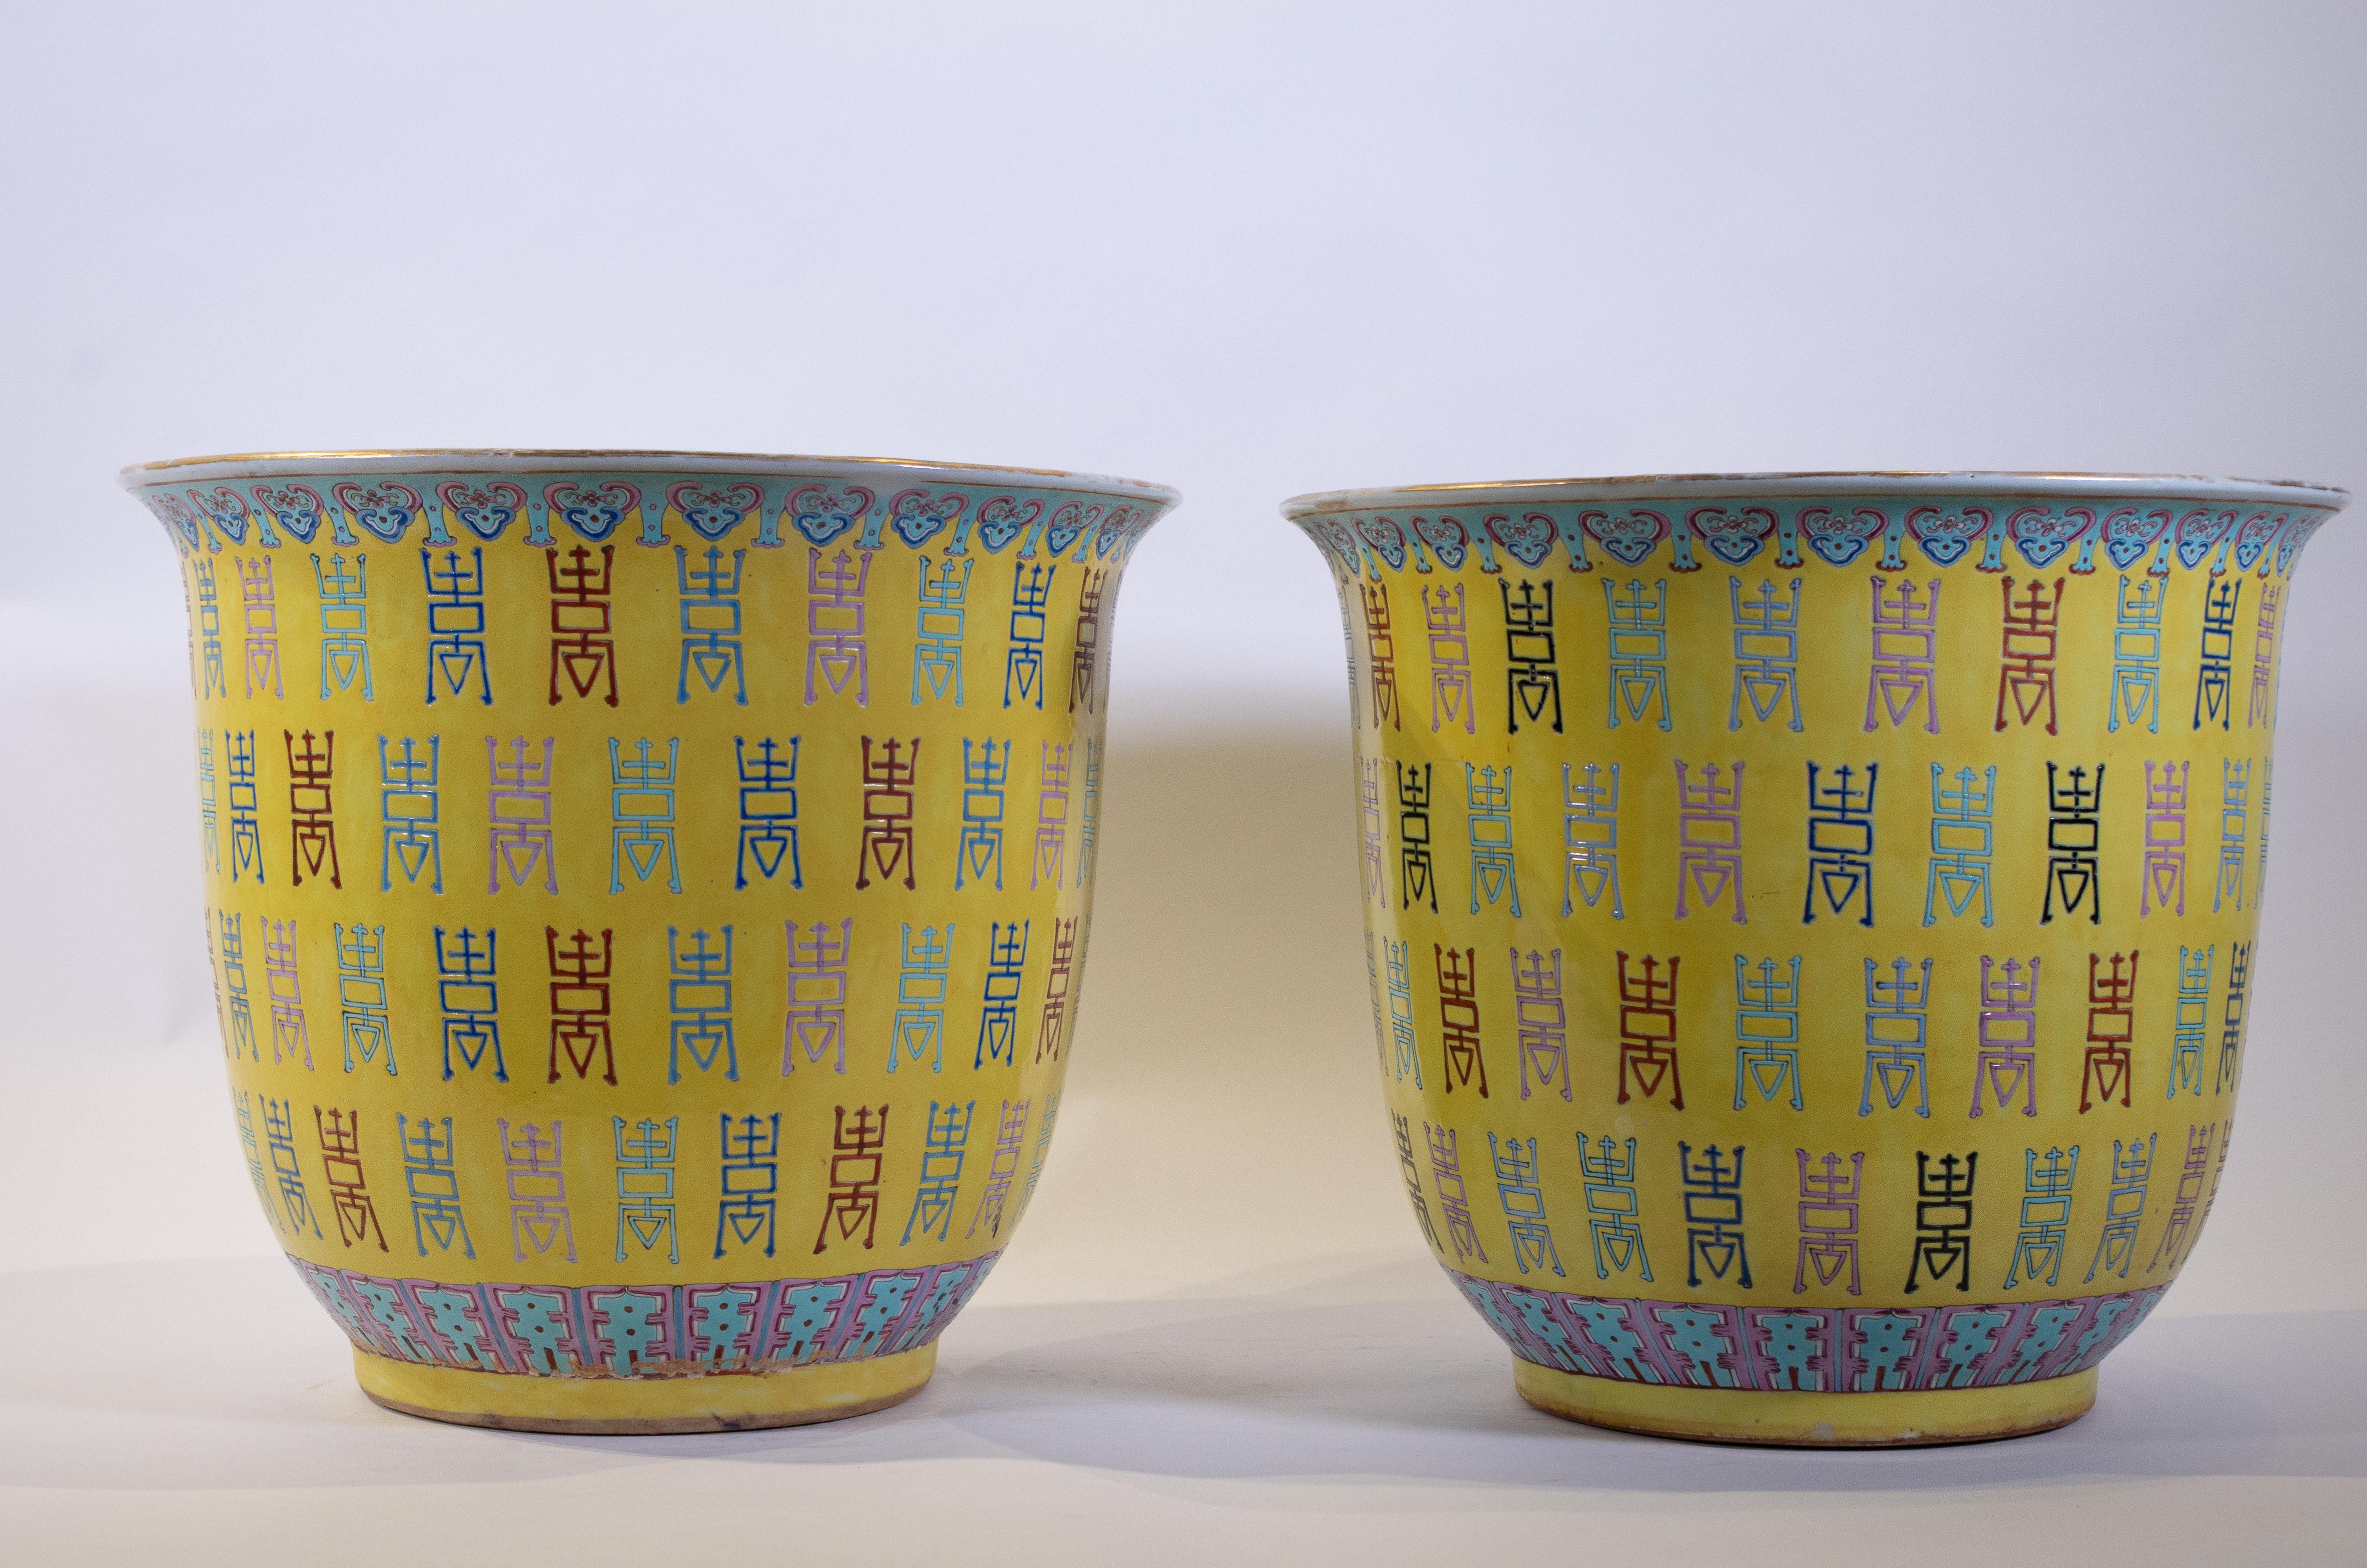 A fabulous, large, and decorative pair of imperial yellow ground Famille rose Chinese Export PolyChrome planters/vases. Each is beautifully painted in Imperial yellow ground enamels and hand painted with Chinese characters in poly-chrome enamels.